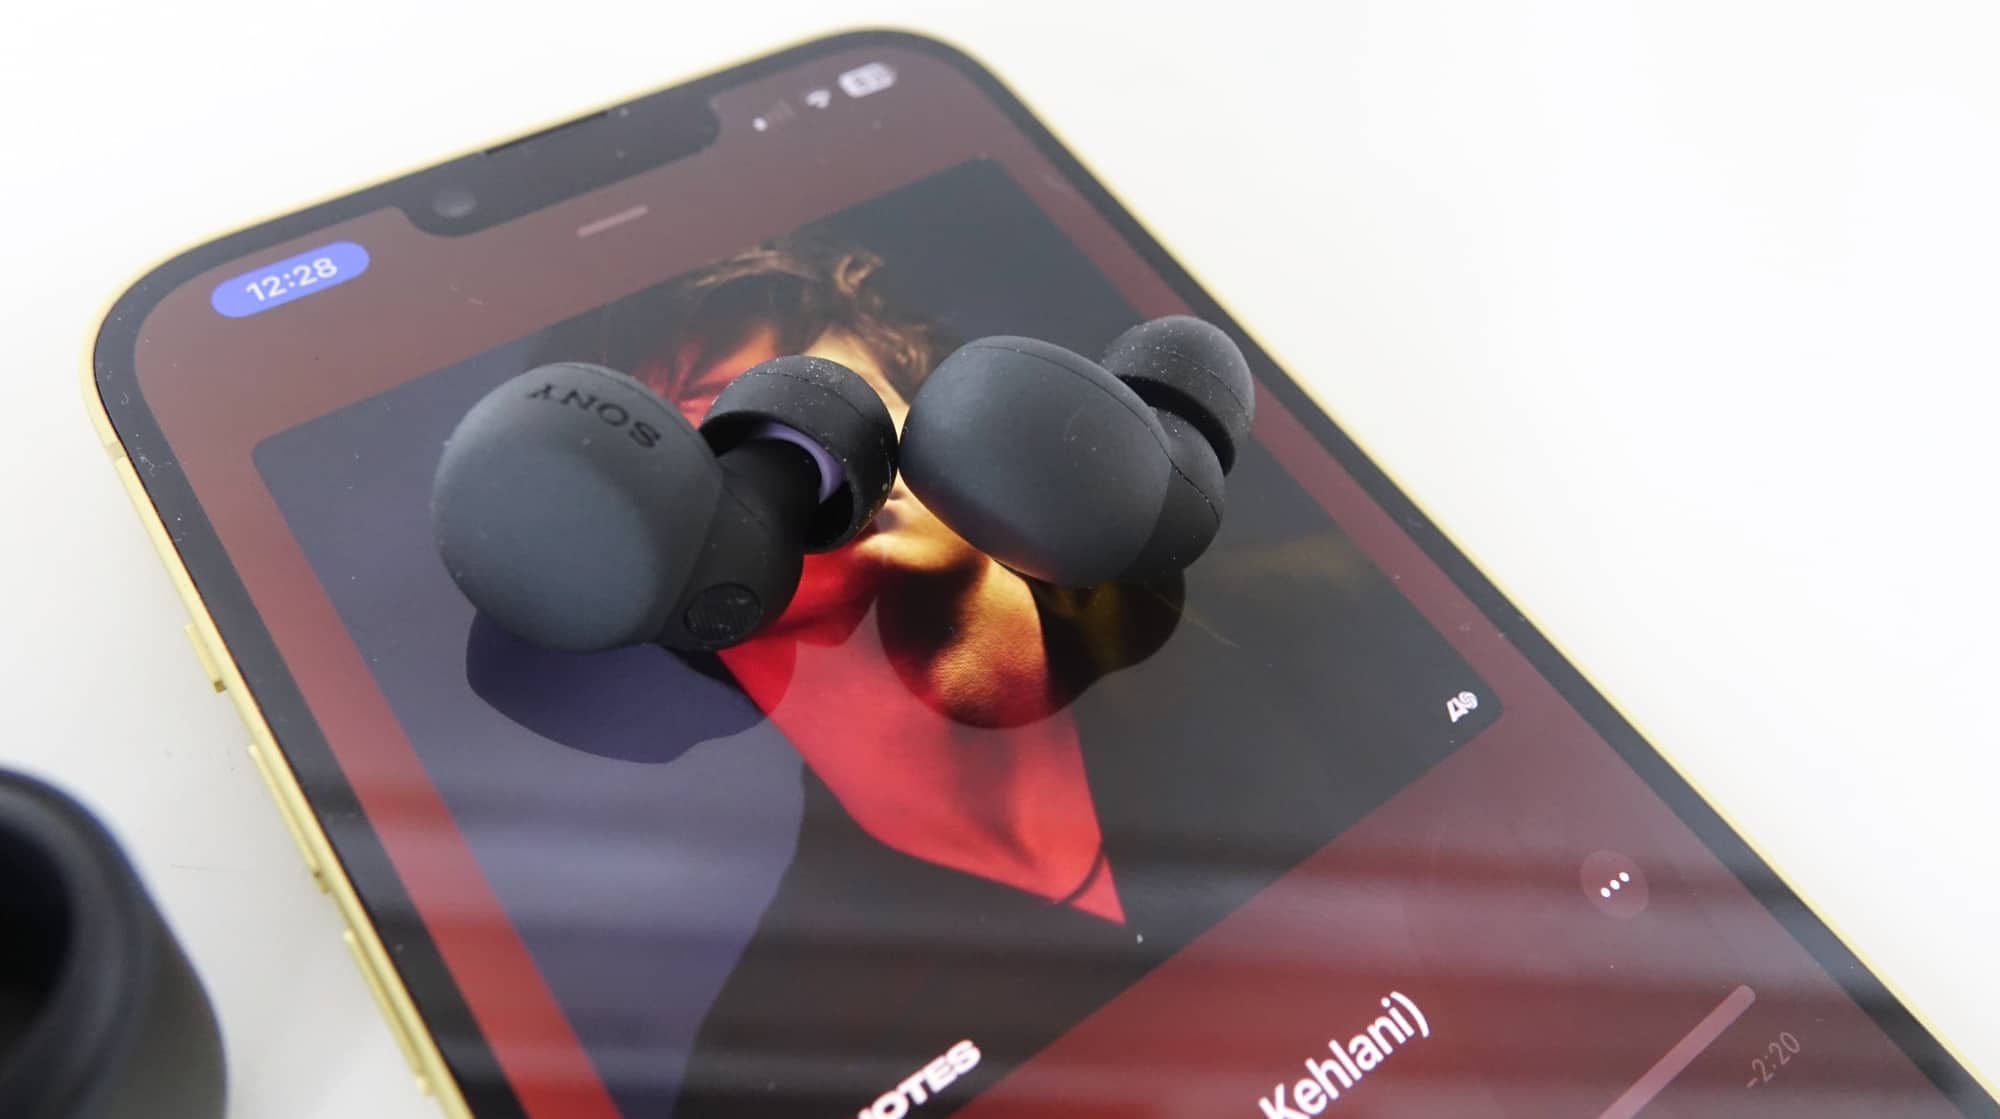 The new Sony LinkBuds S earbuds are pricey, but they might be worth it